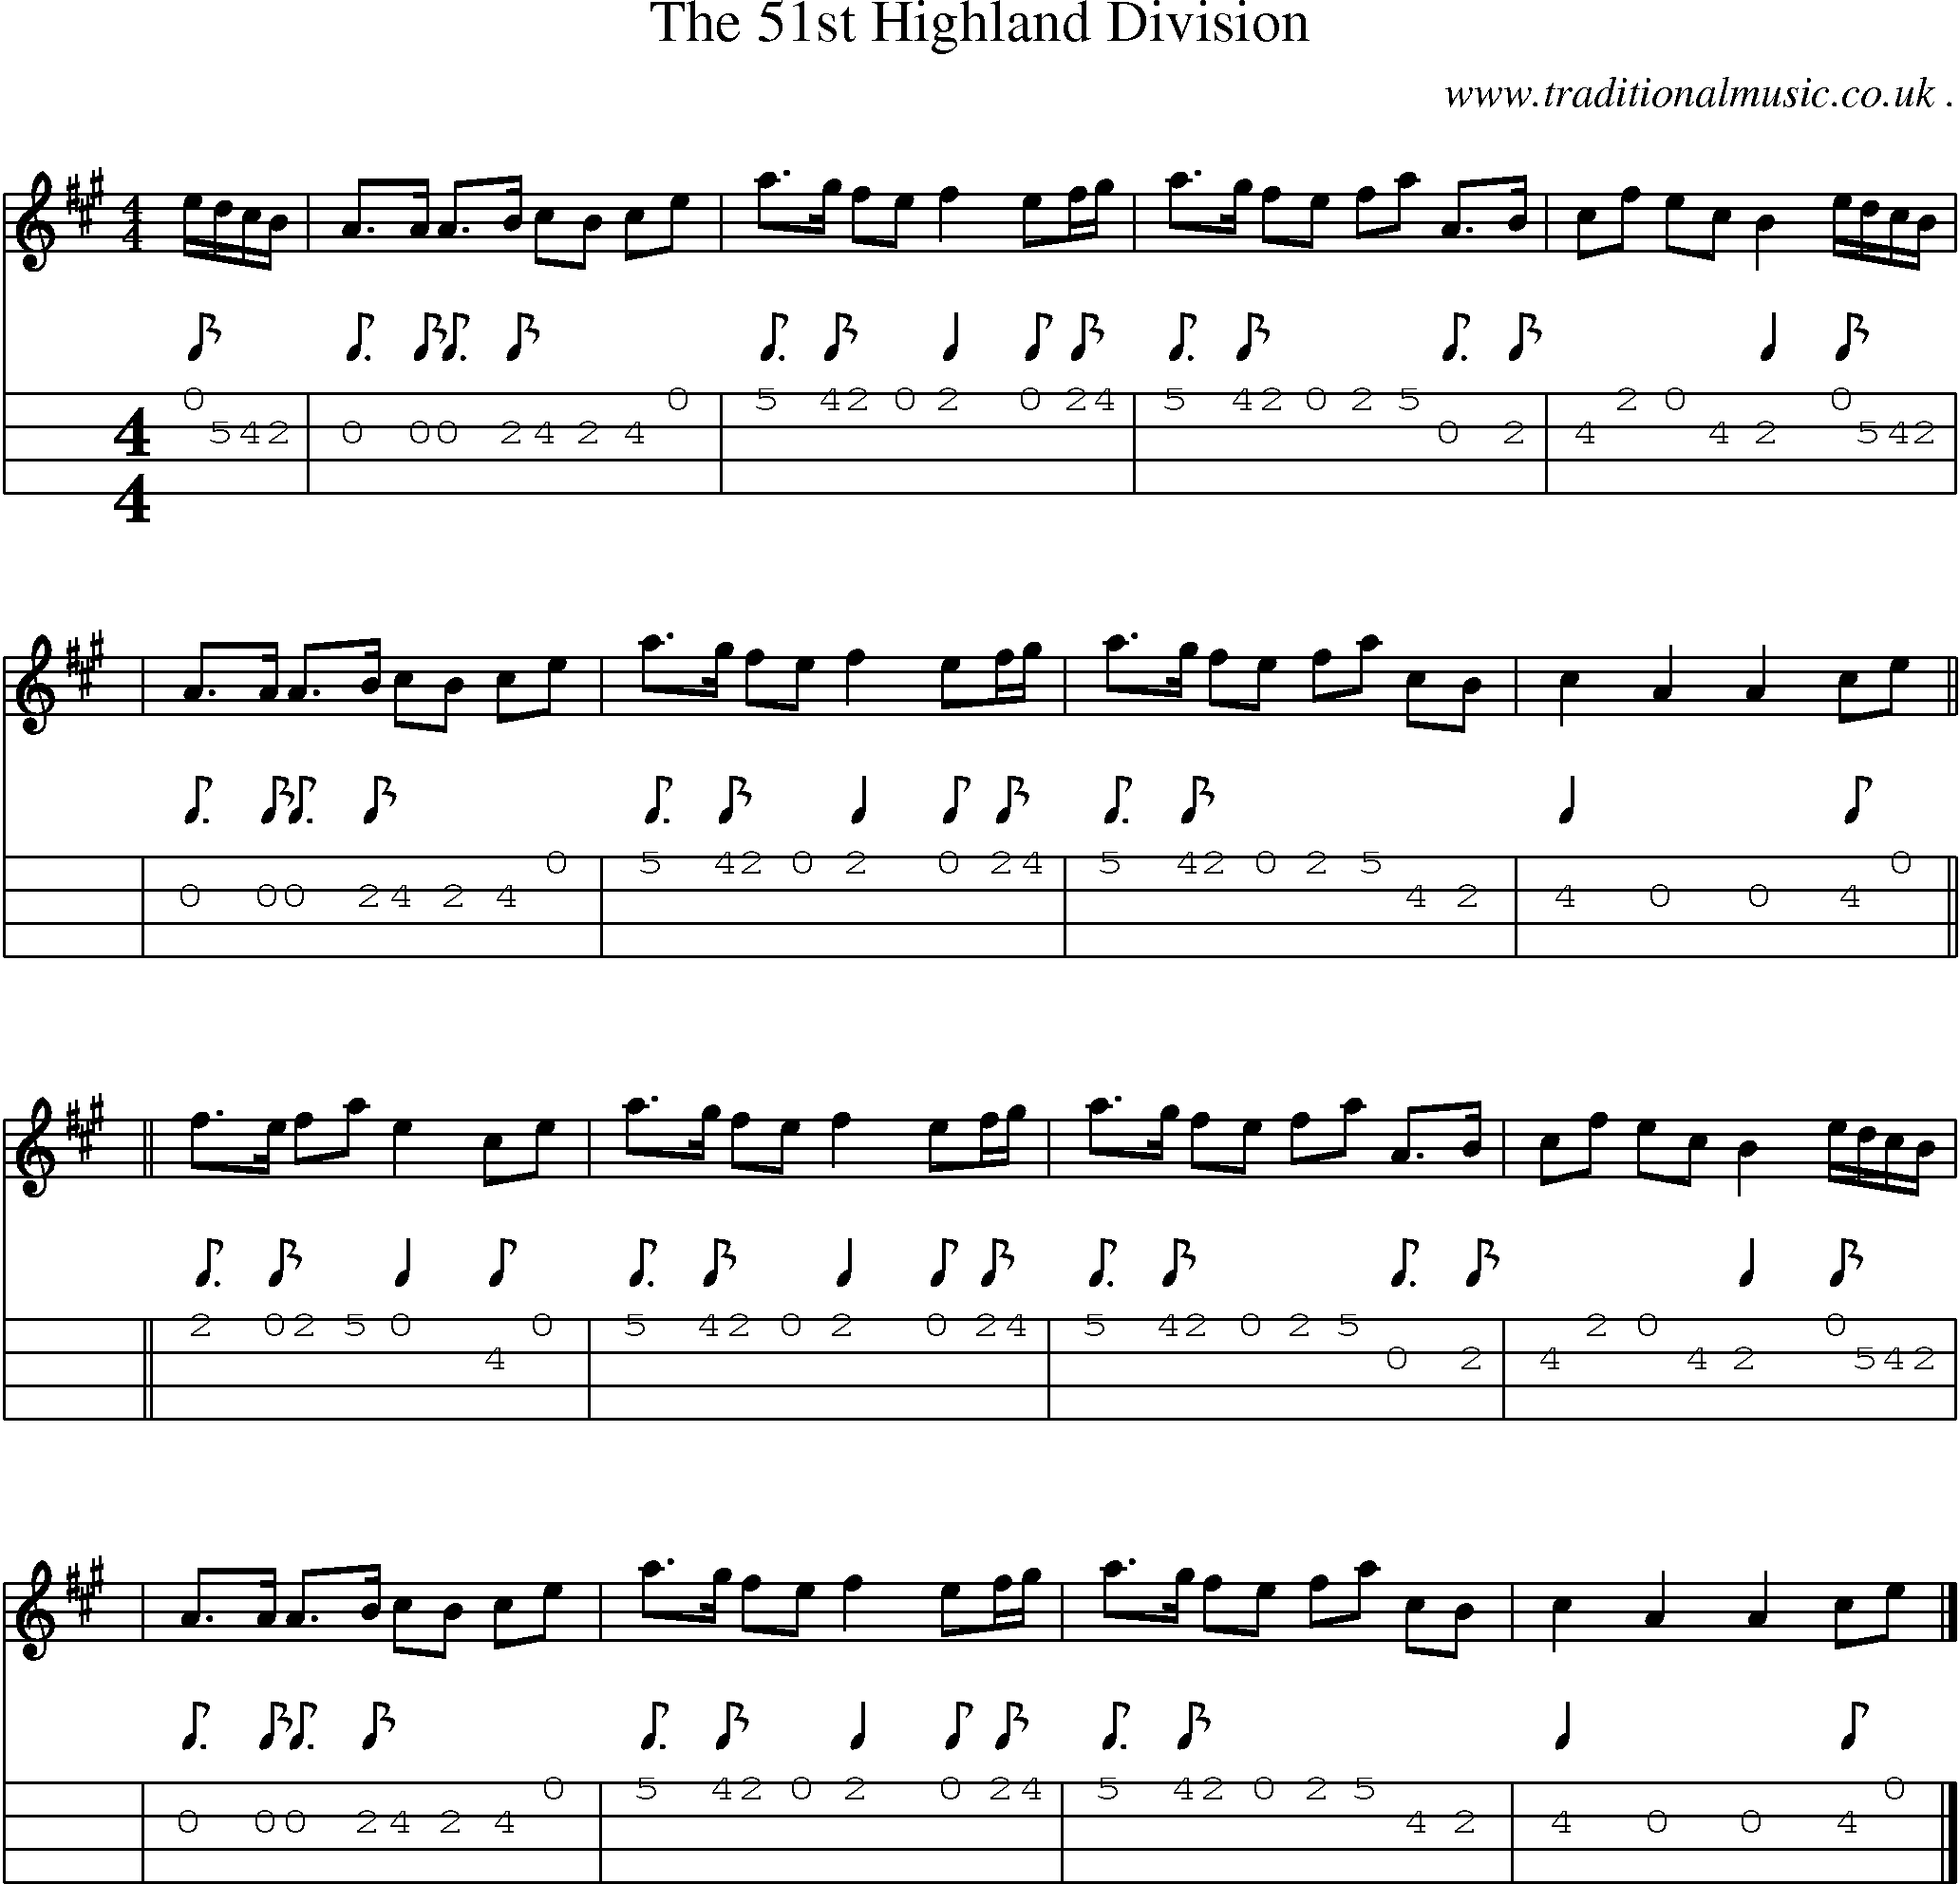 Sheet-music  score, Chords and Mandolin Tabs for The 51st Highland Division